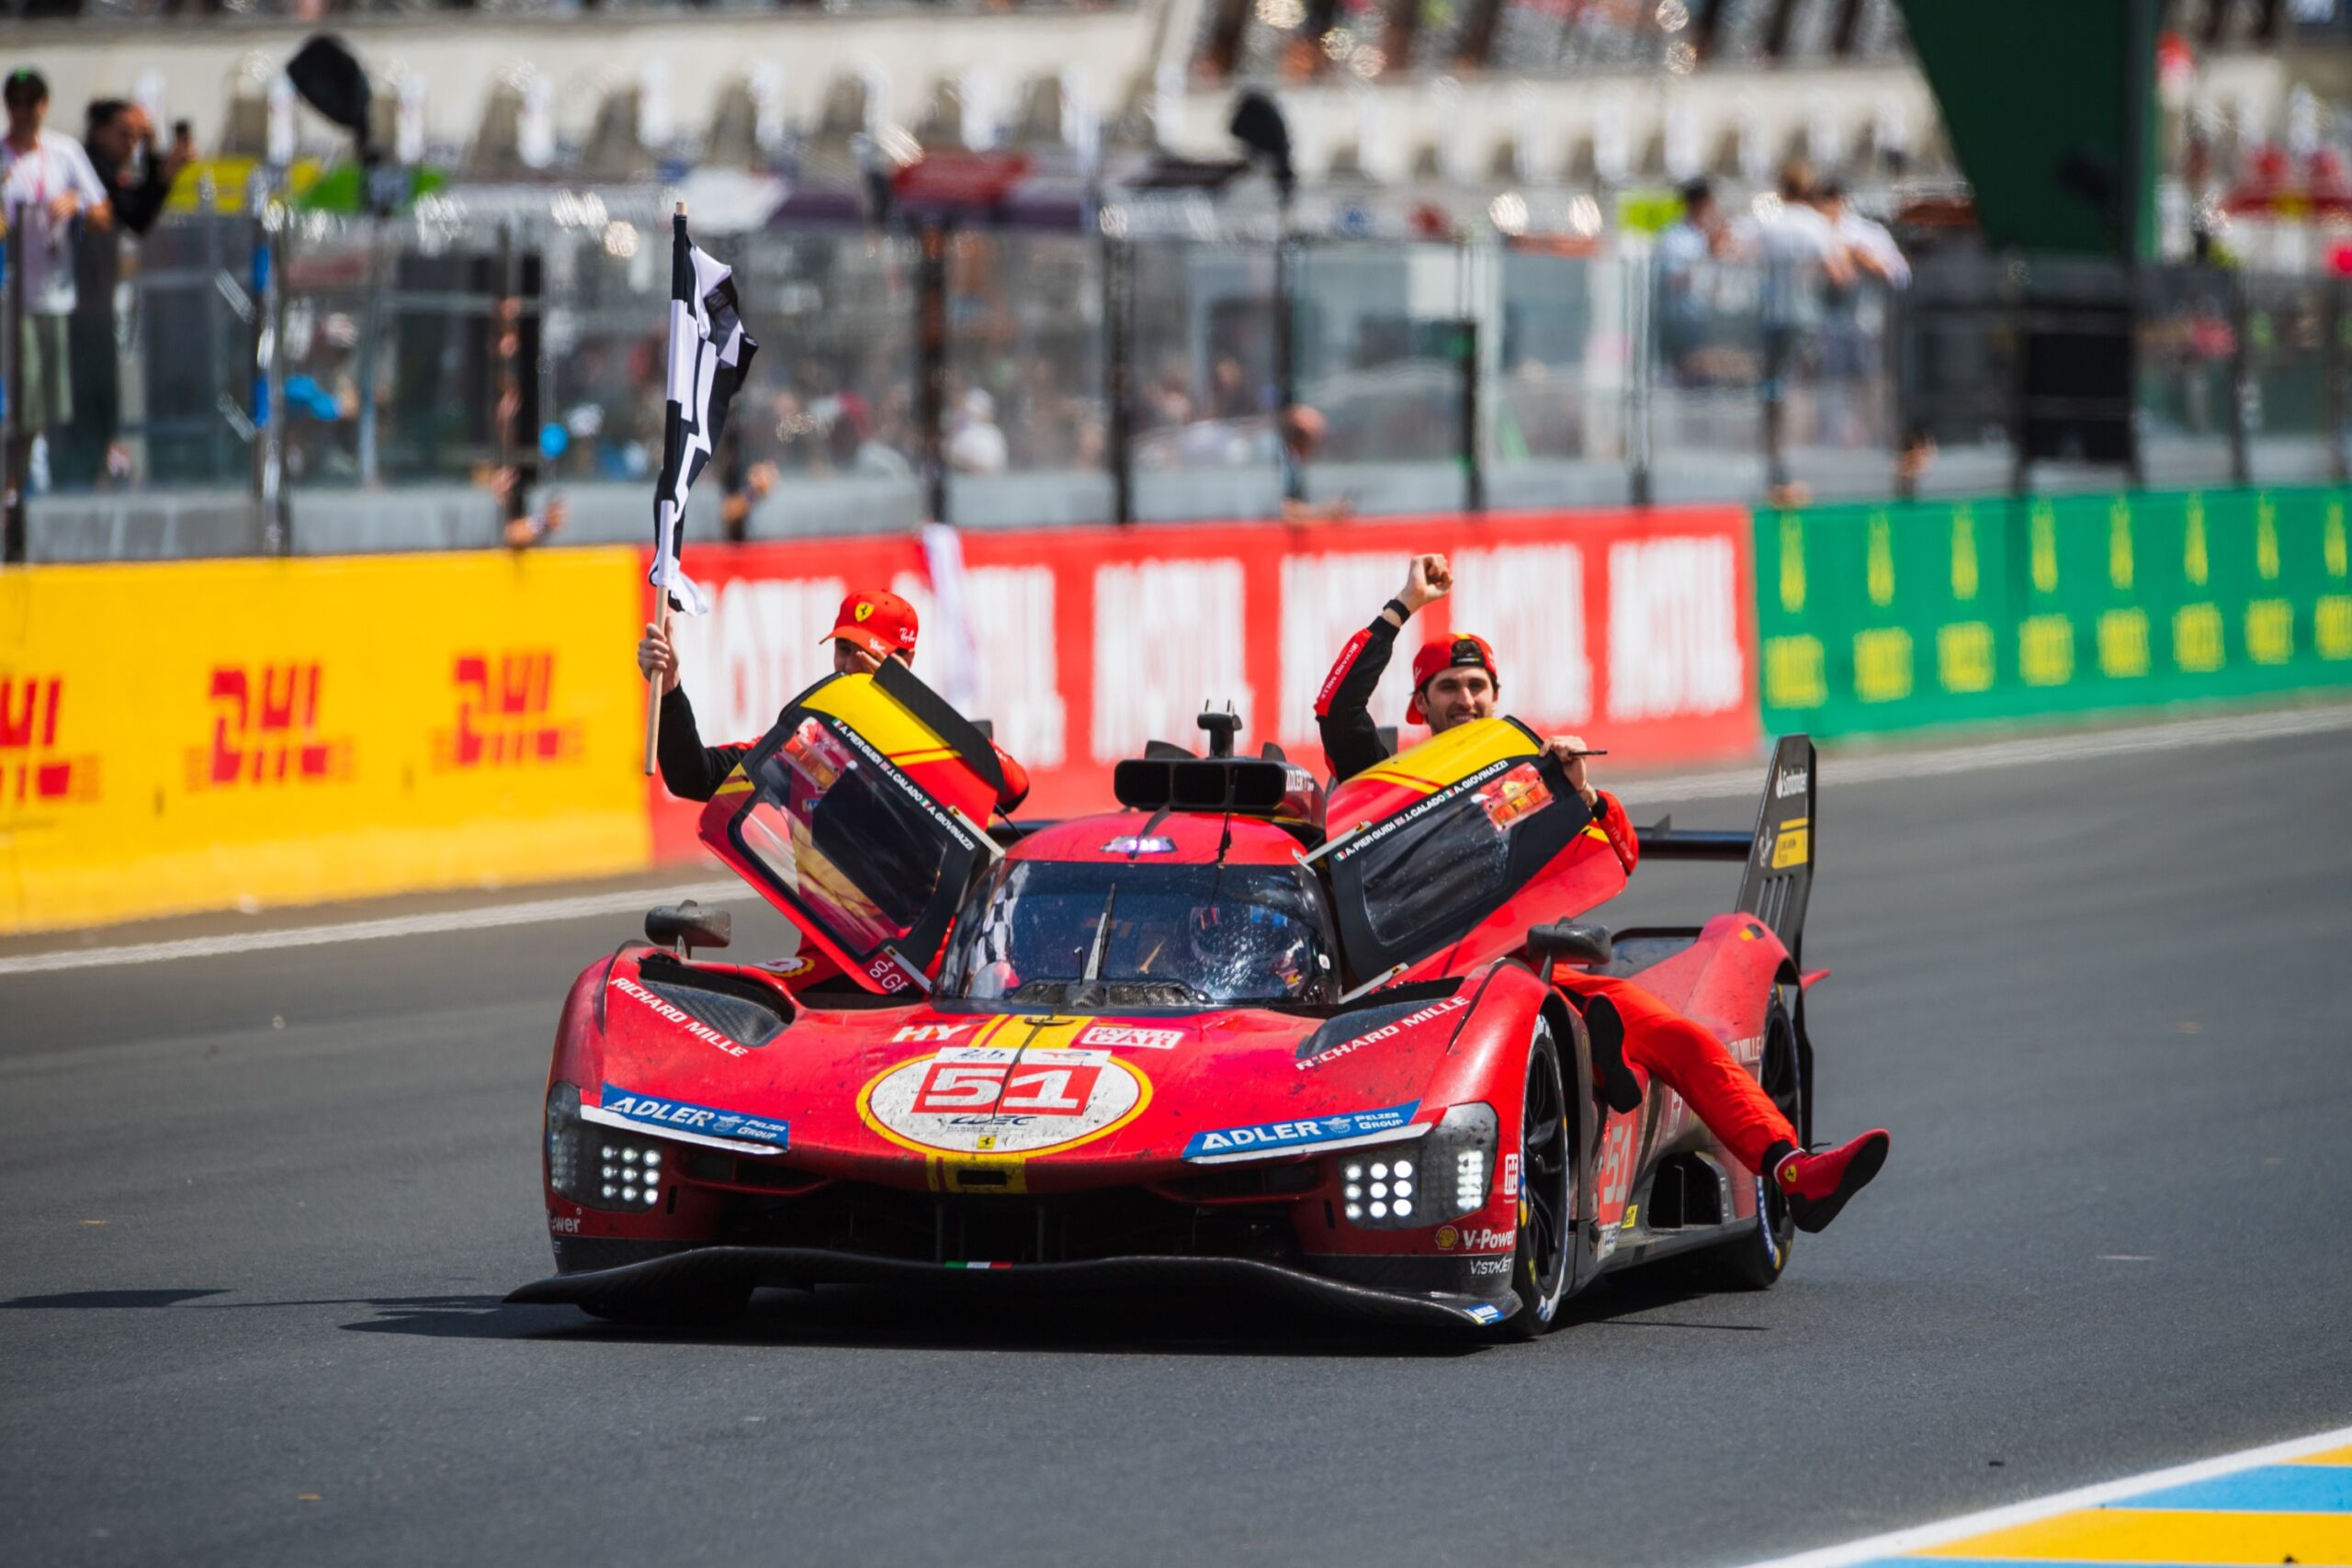 Here's how Ferrari designed a car that won Le Mans on its first